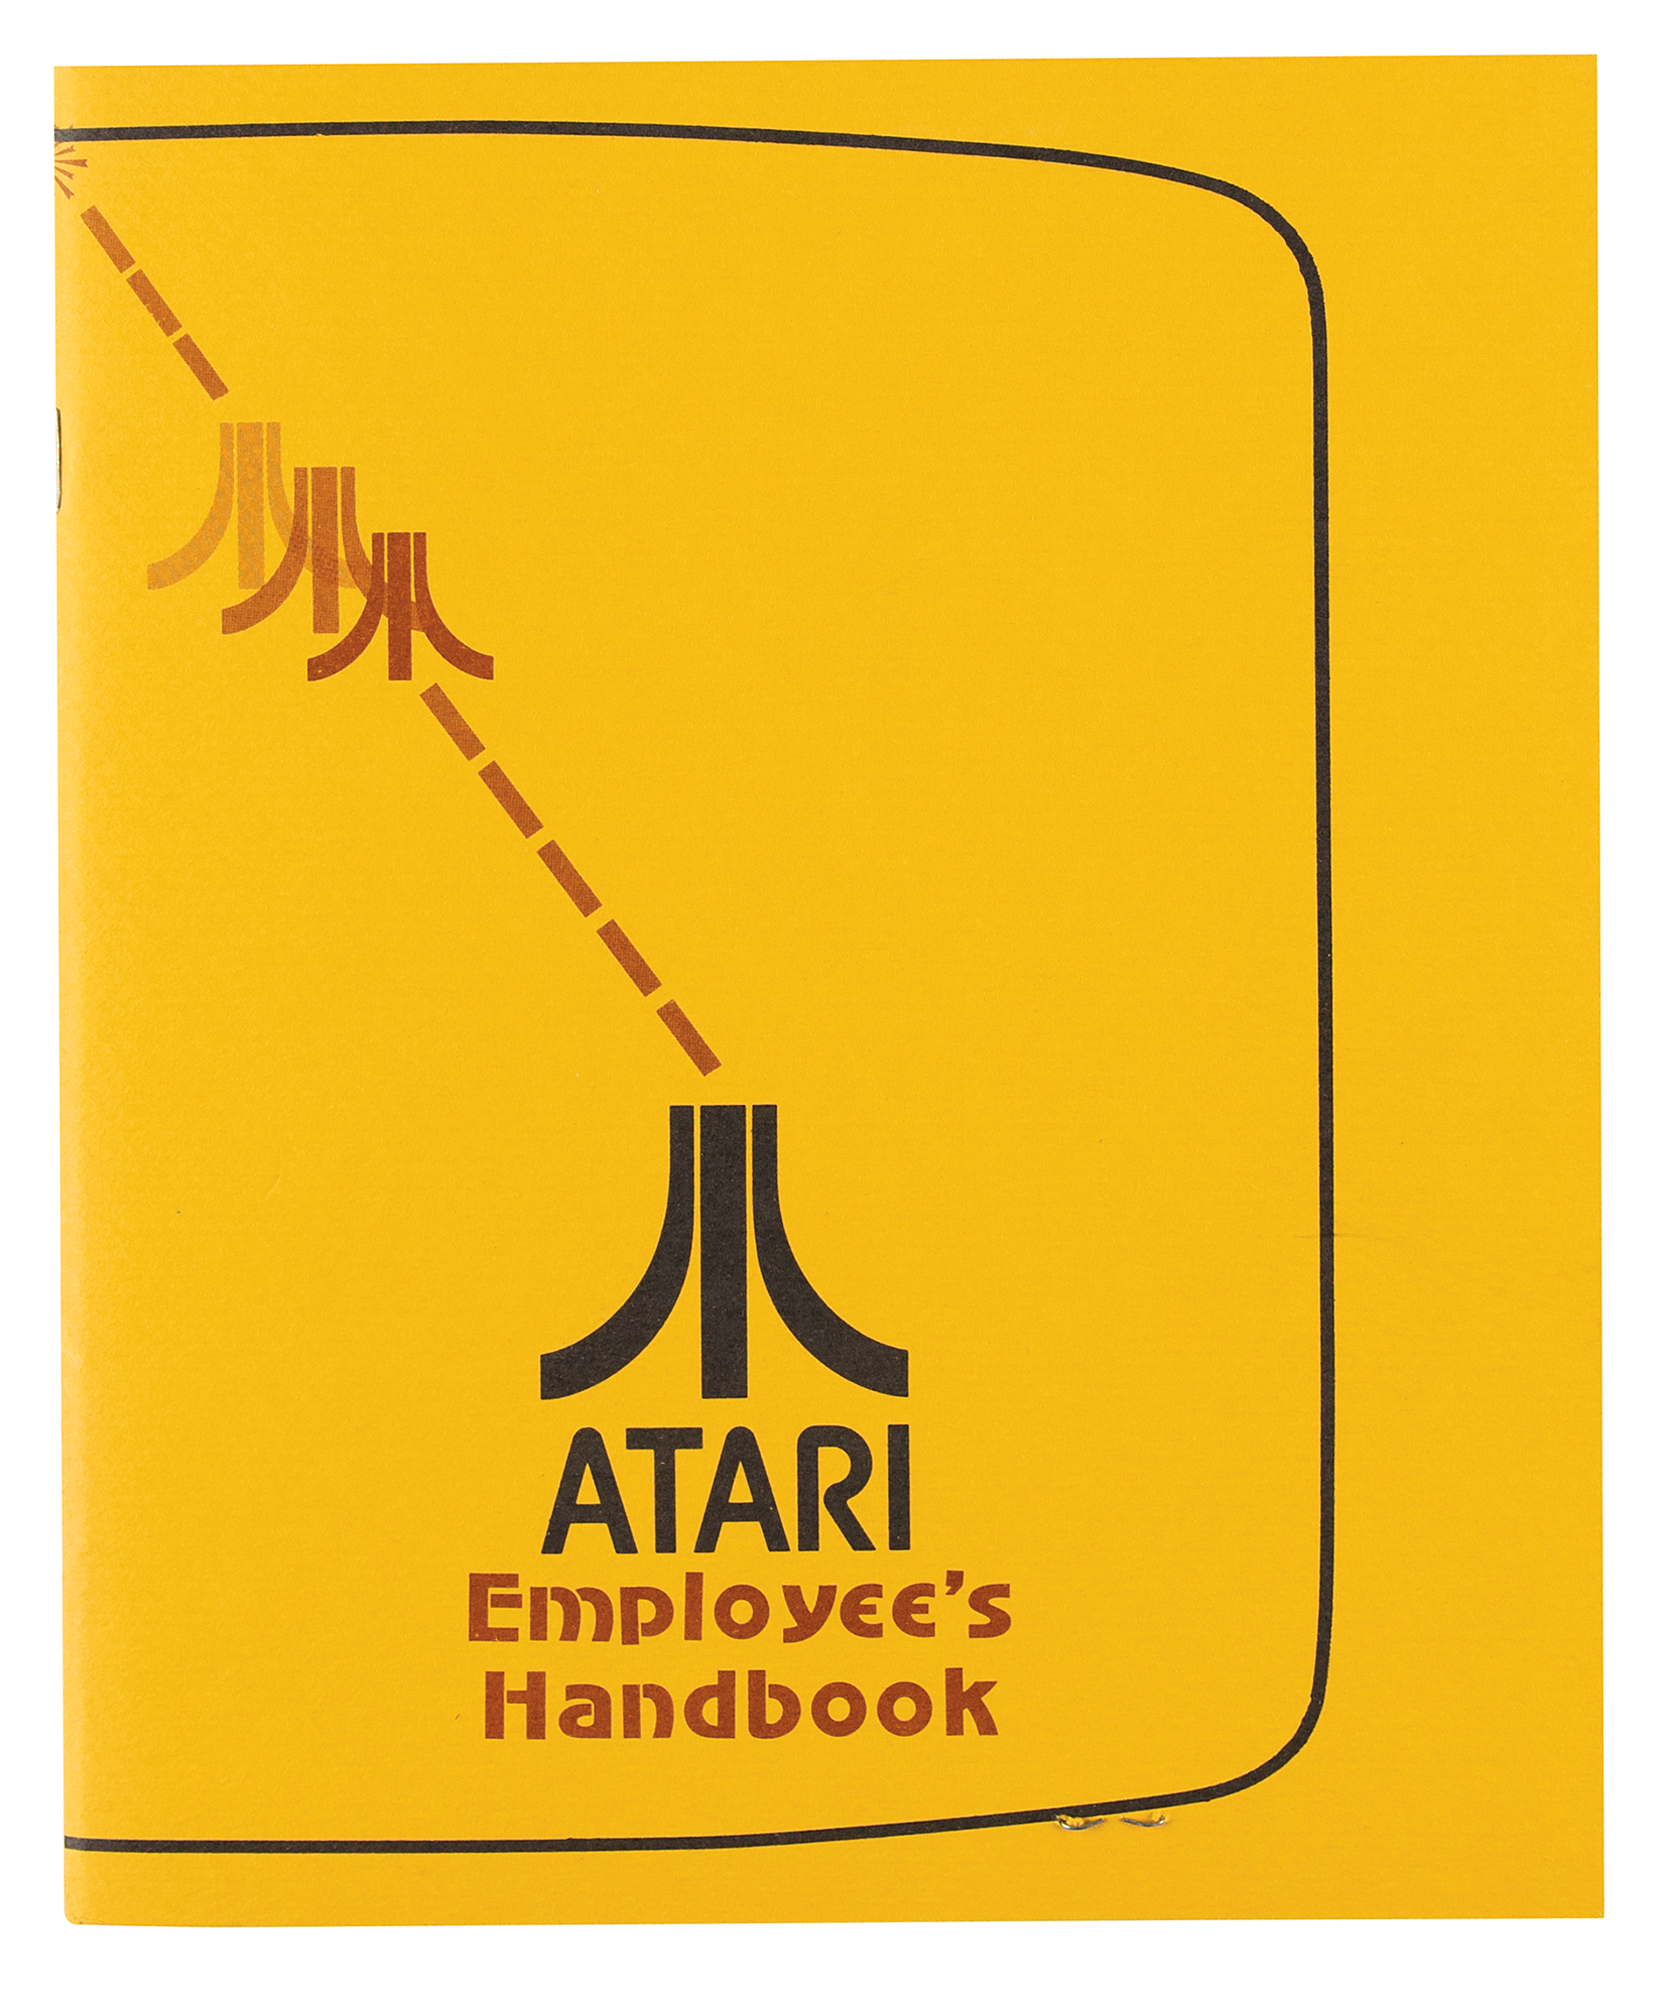 Lot #316 Atari Employee Handbook and Inter-Office Material from the collection of David Sherman